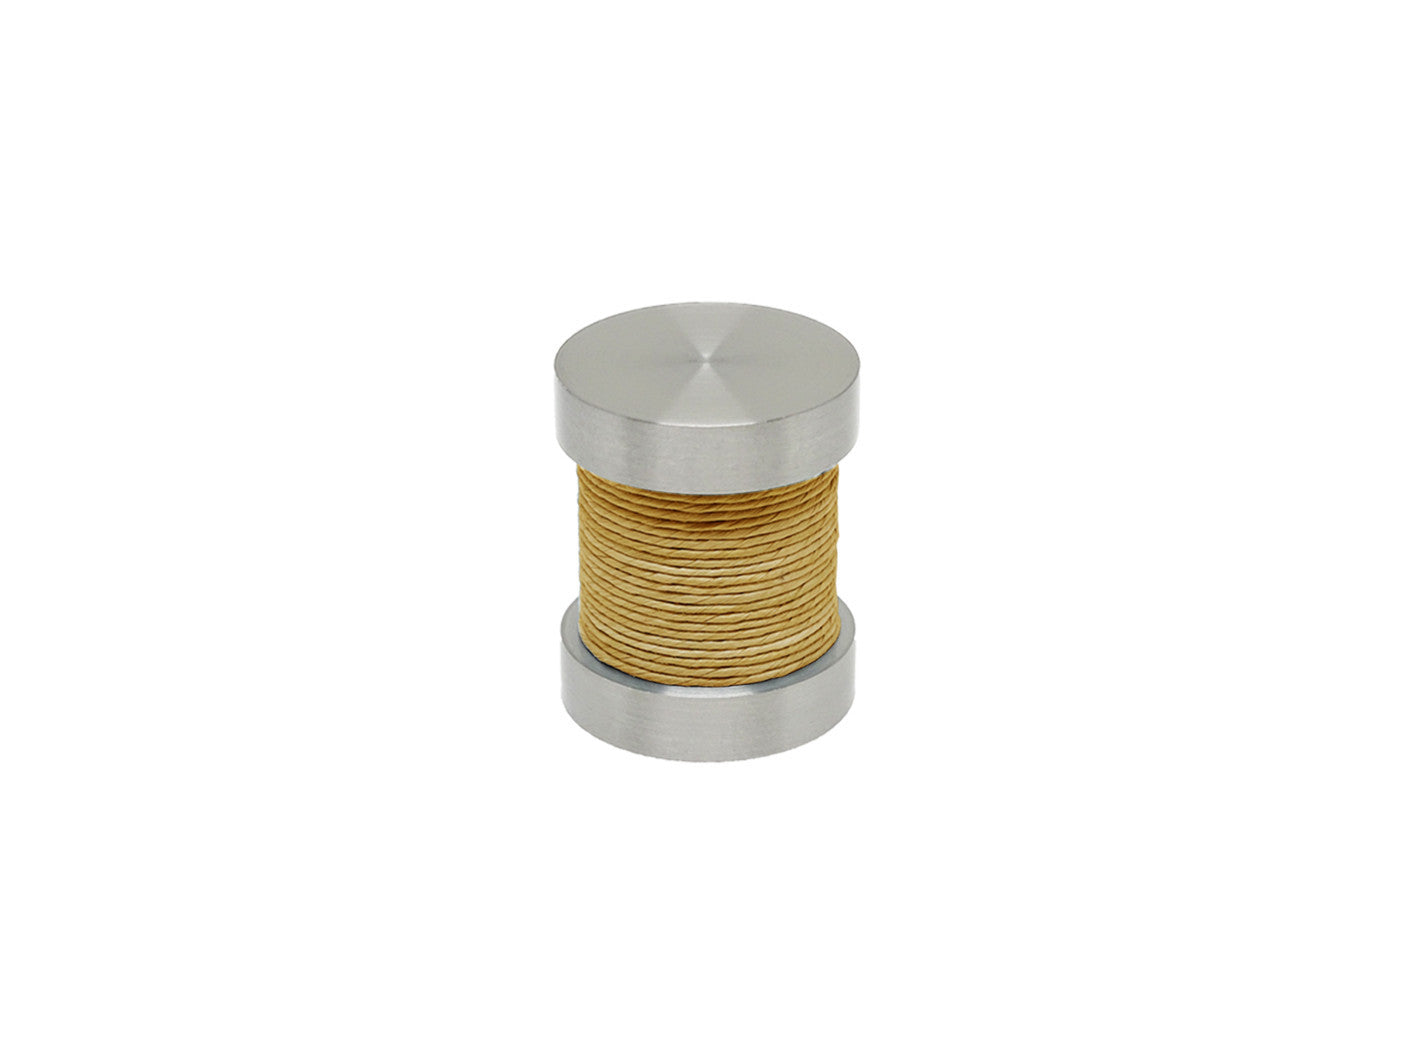 Yellow Ochre coloured twine groove finial | Walcot House 30mm stainless steel collection